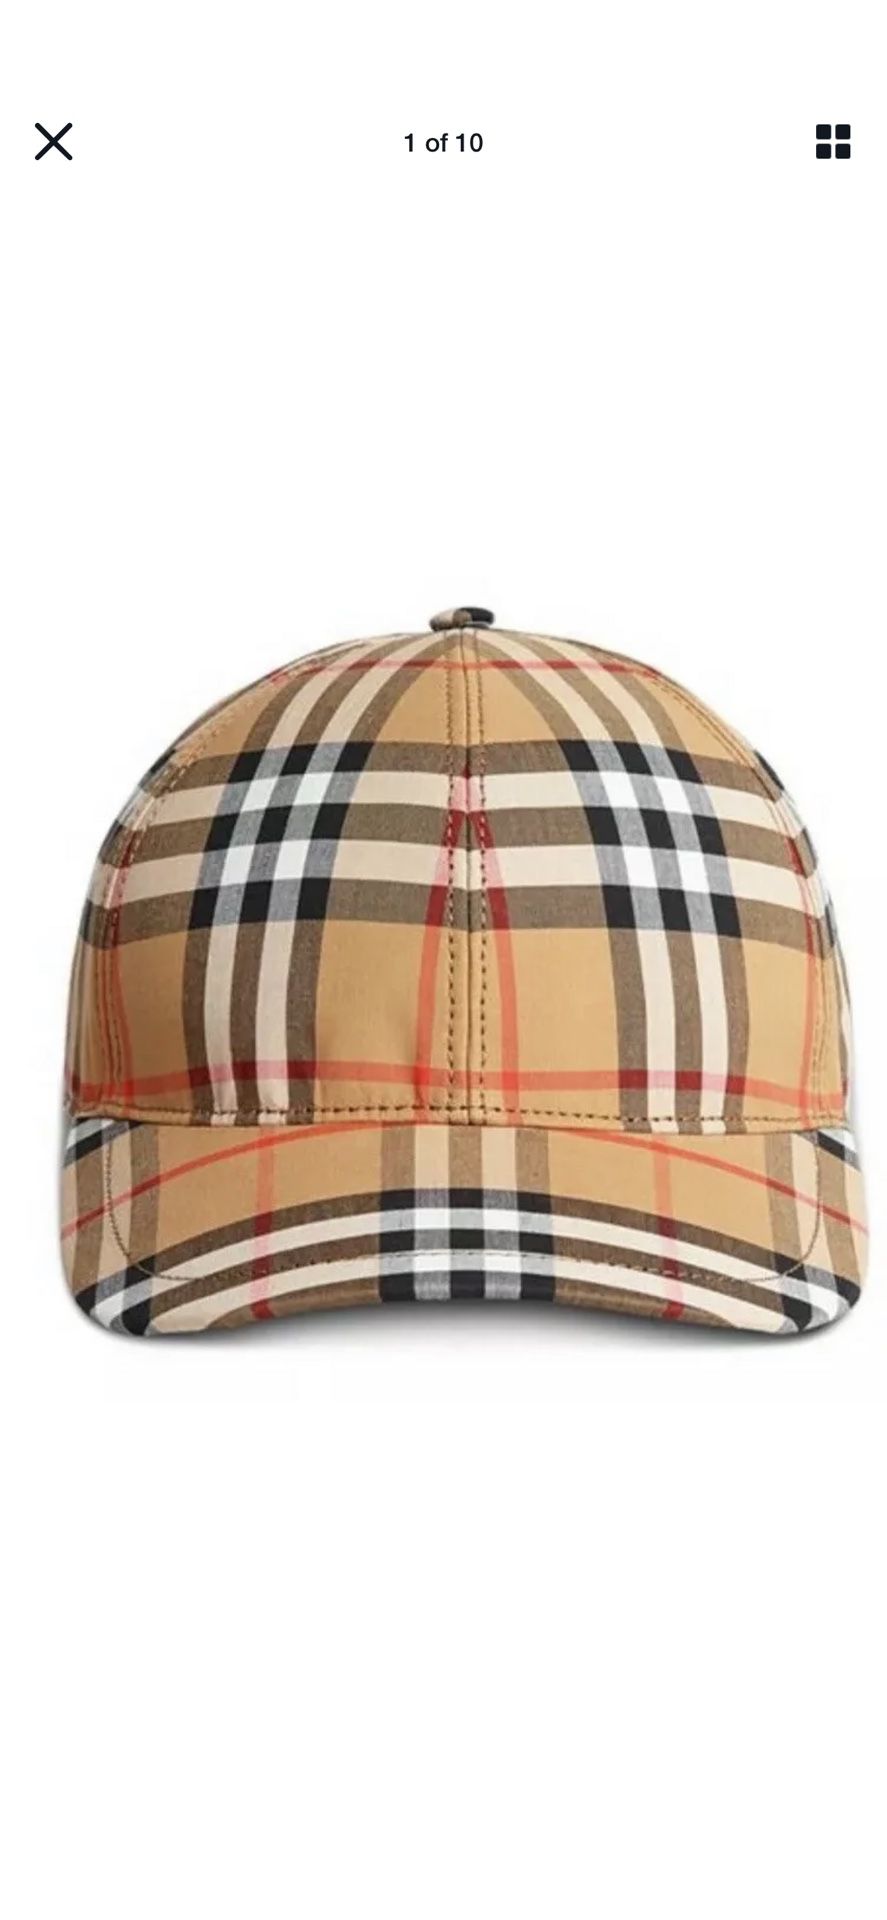 Burberry hat size large